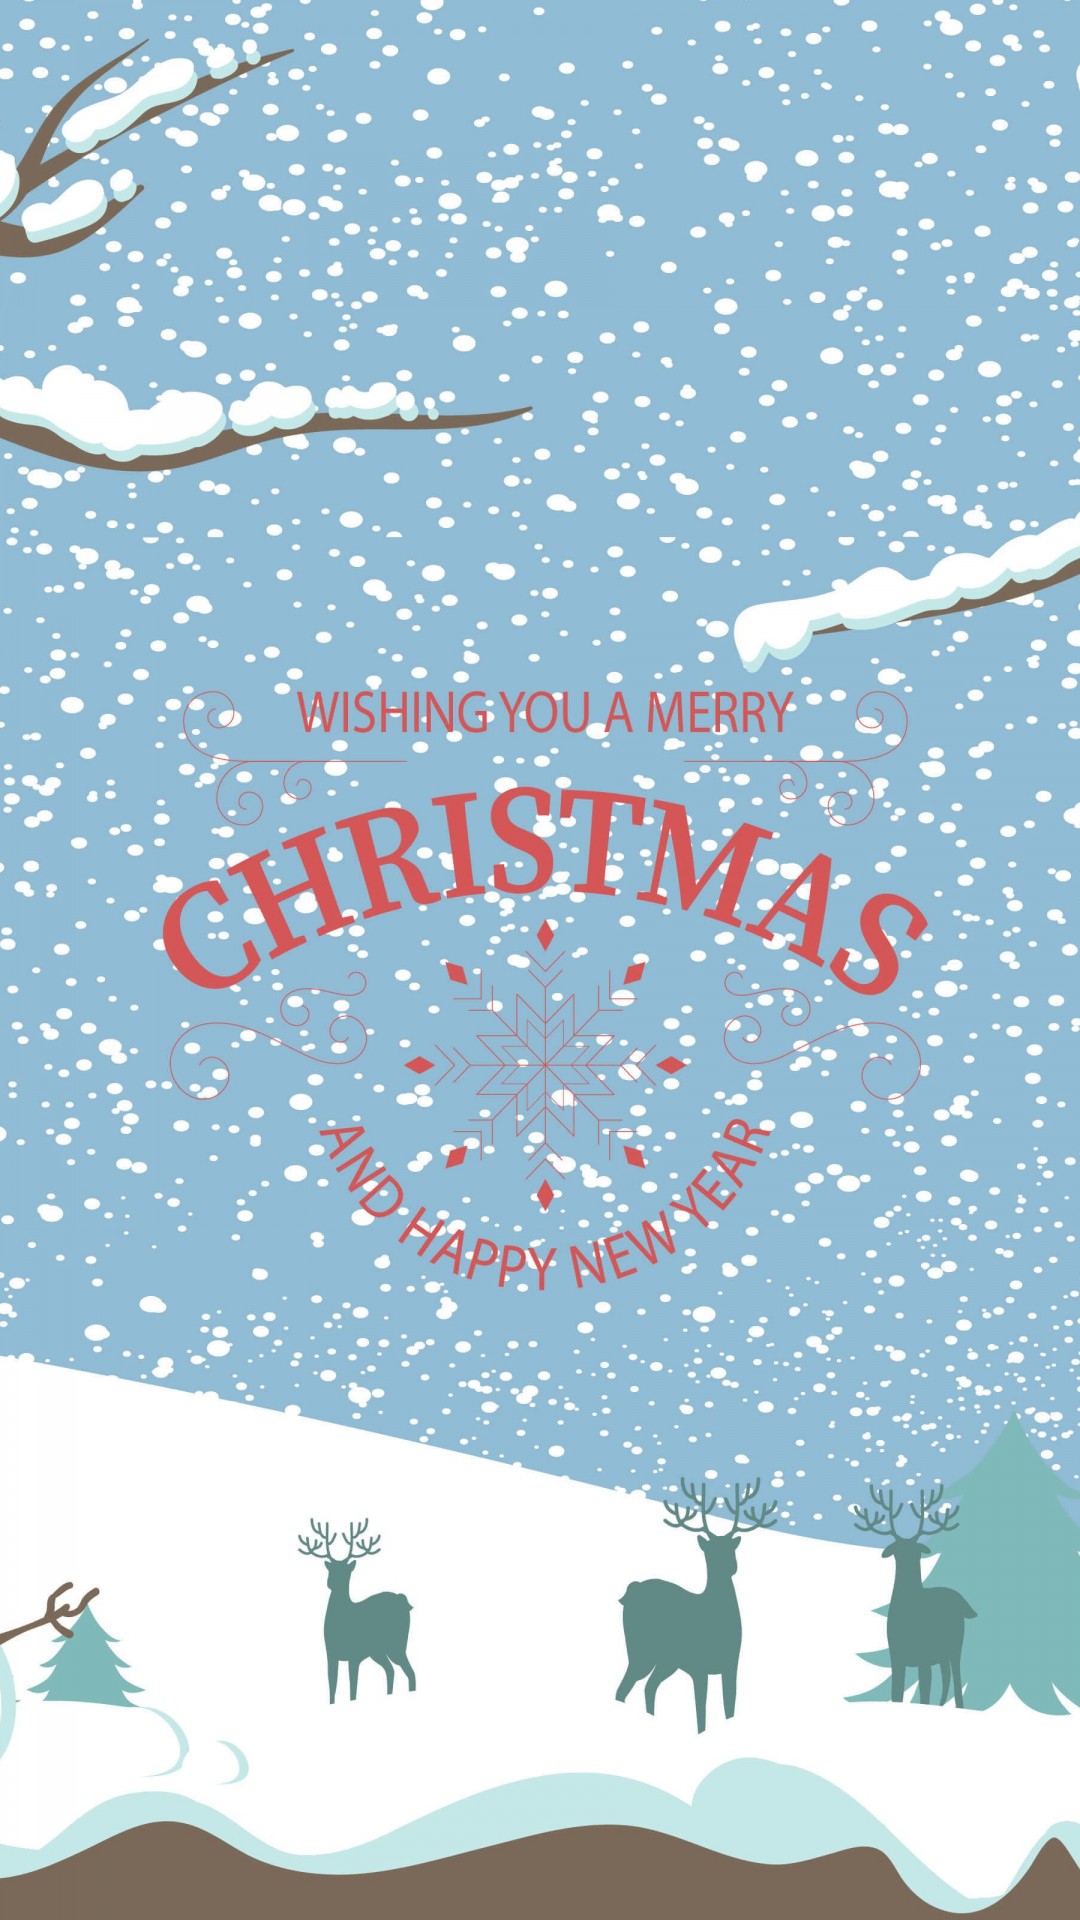 Merry Christmas Illustration Wallpaper for HTC One